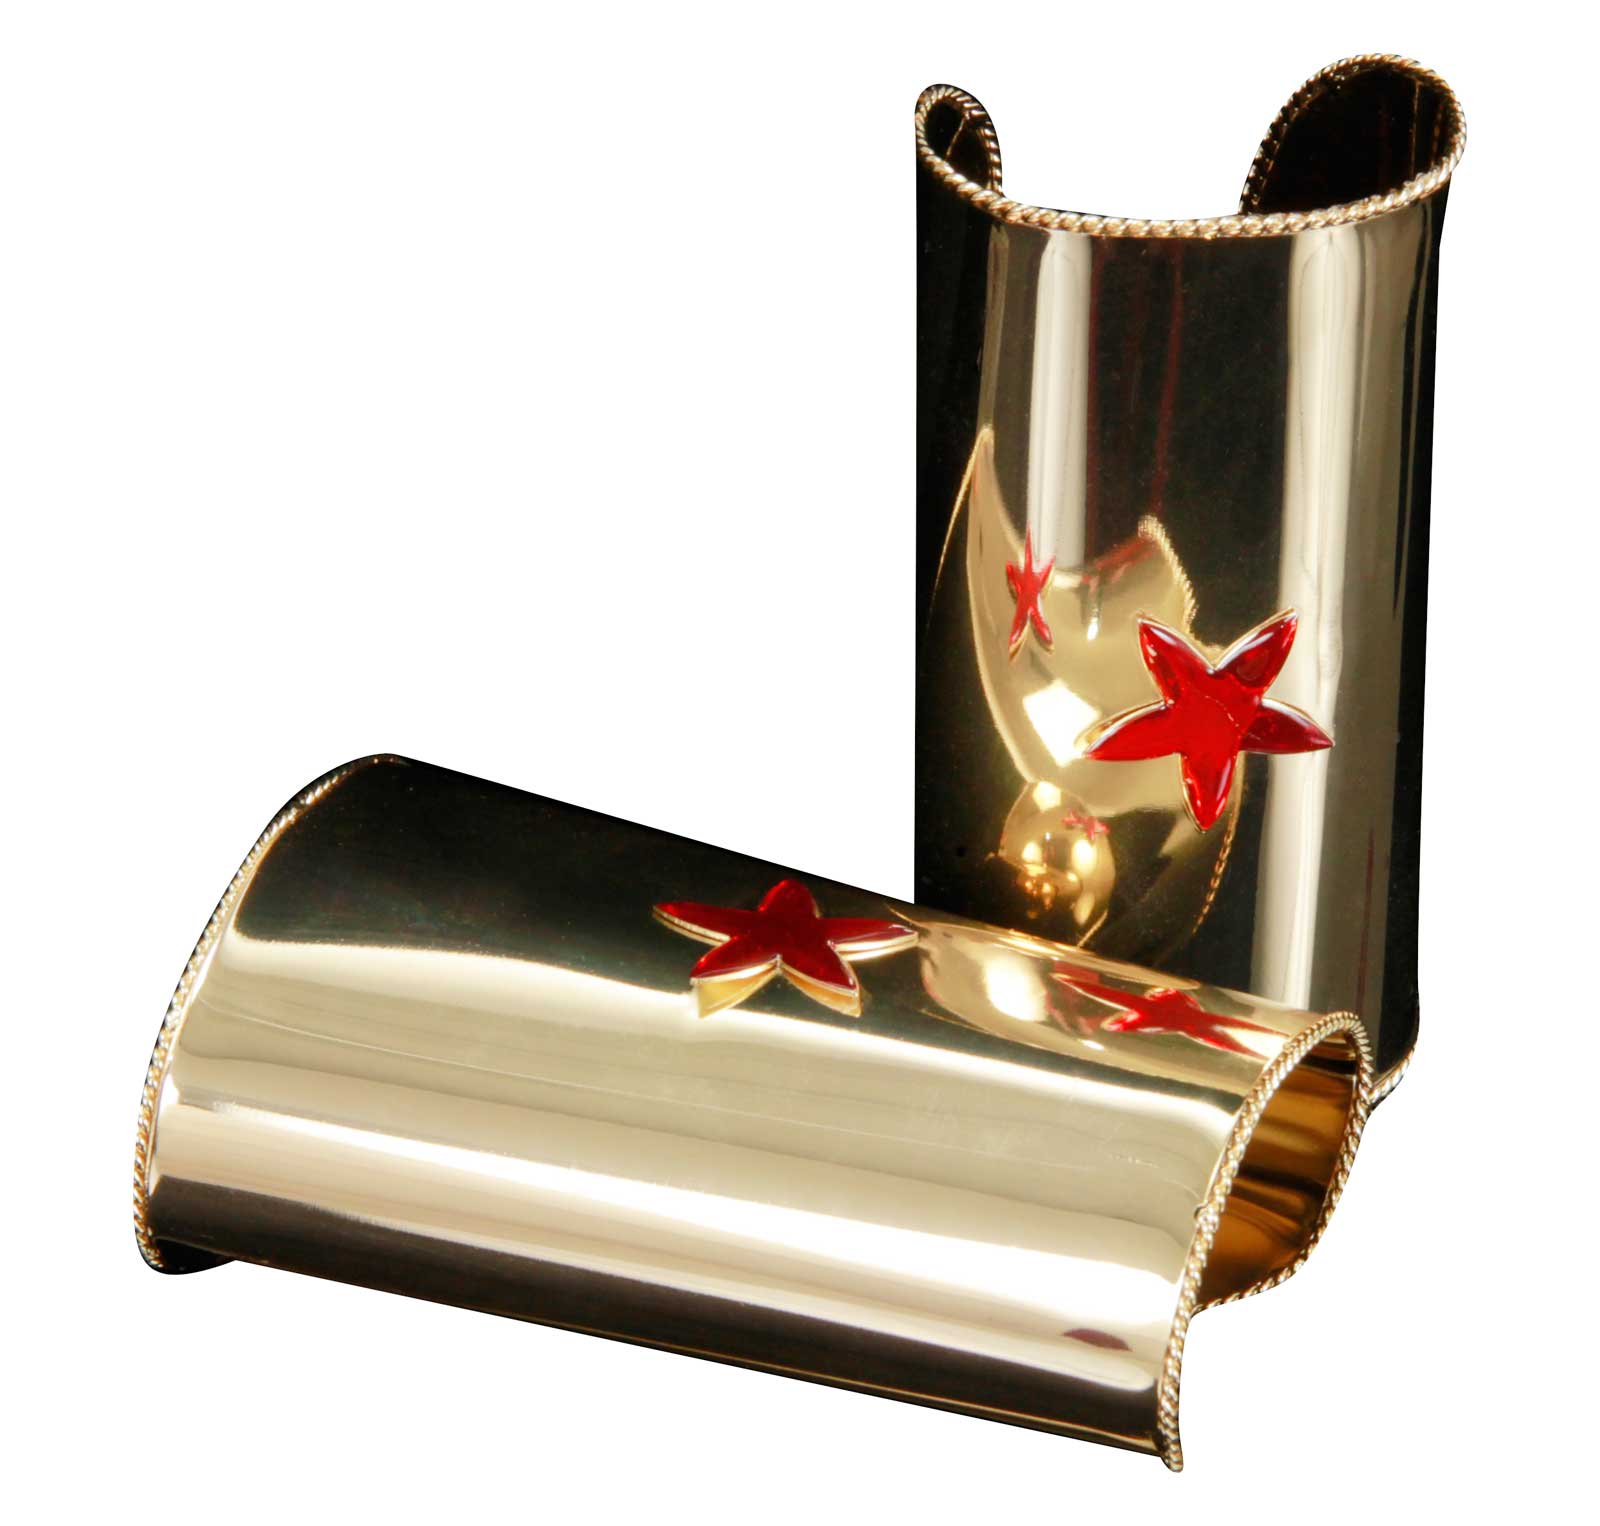 Elope Women's Gold Cuff With Red Star Adult - Red/Gold - One-Size